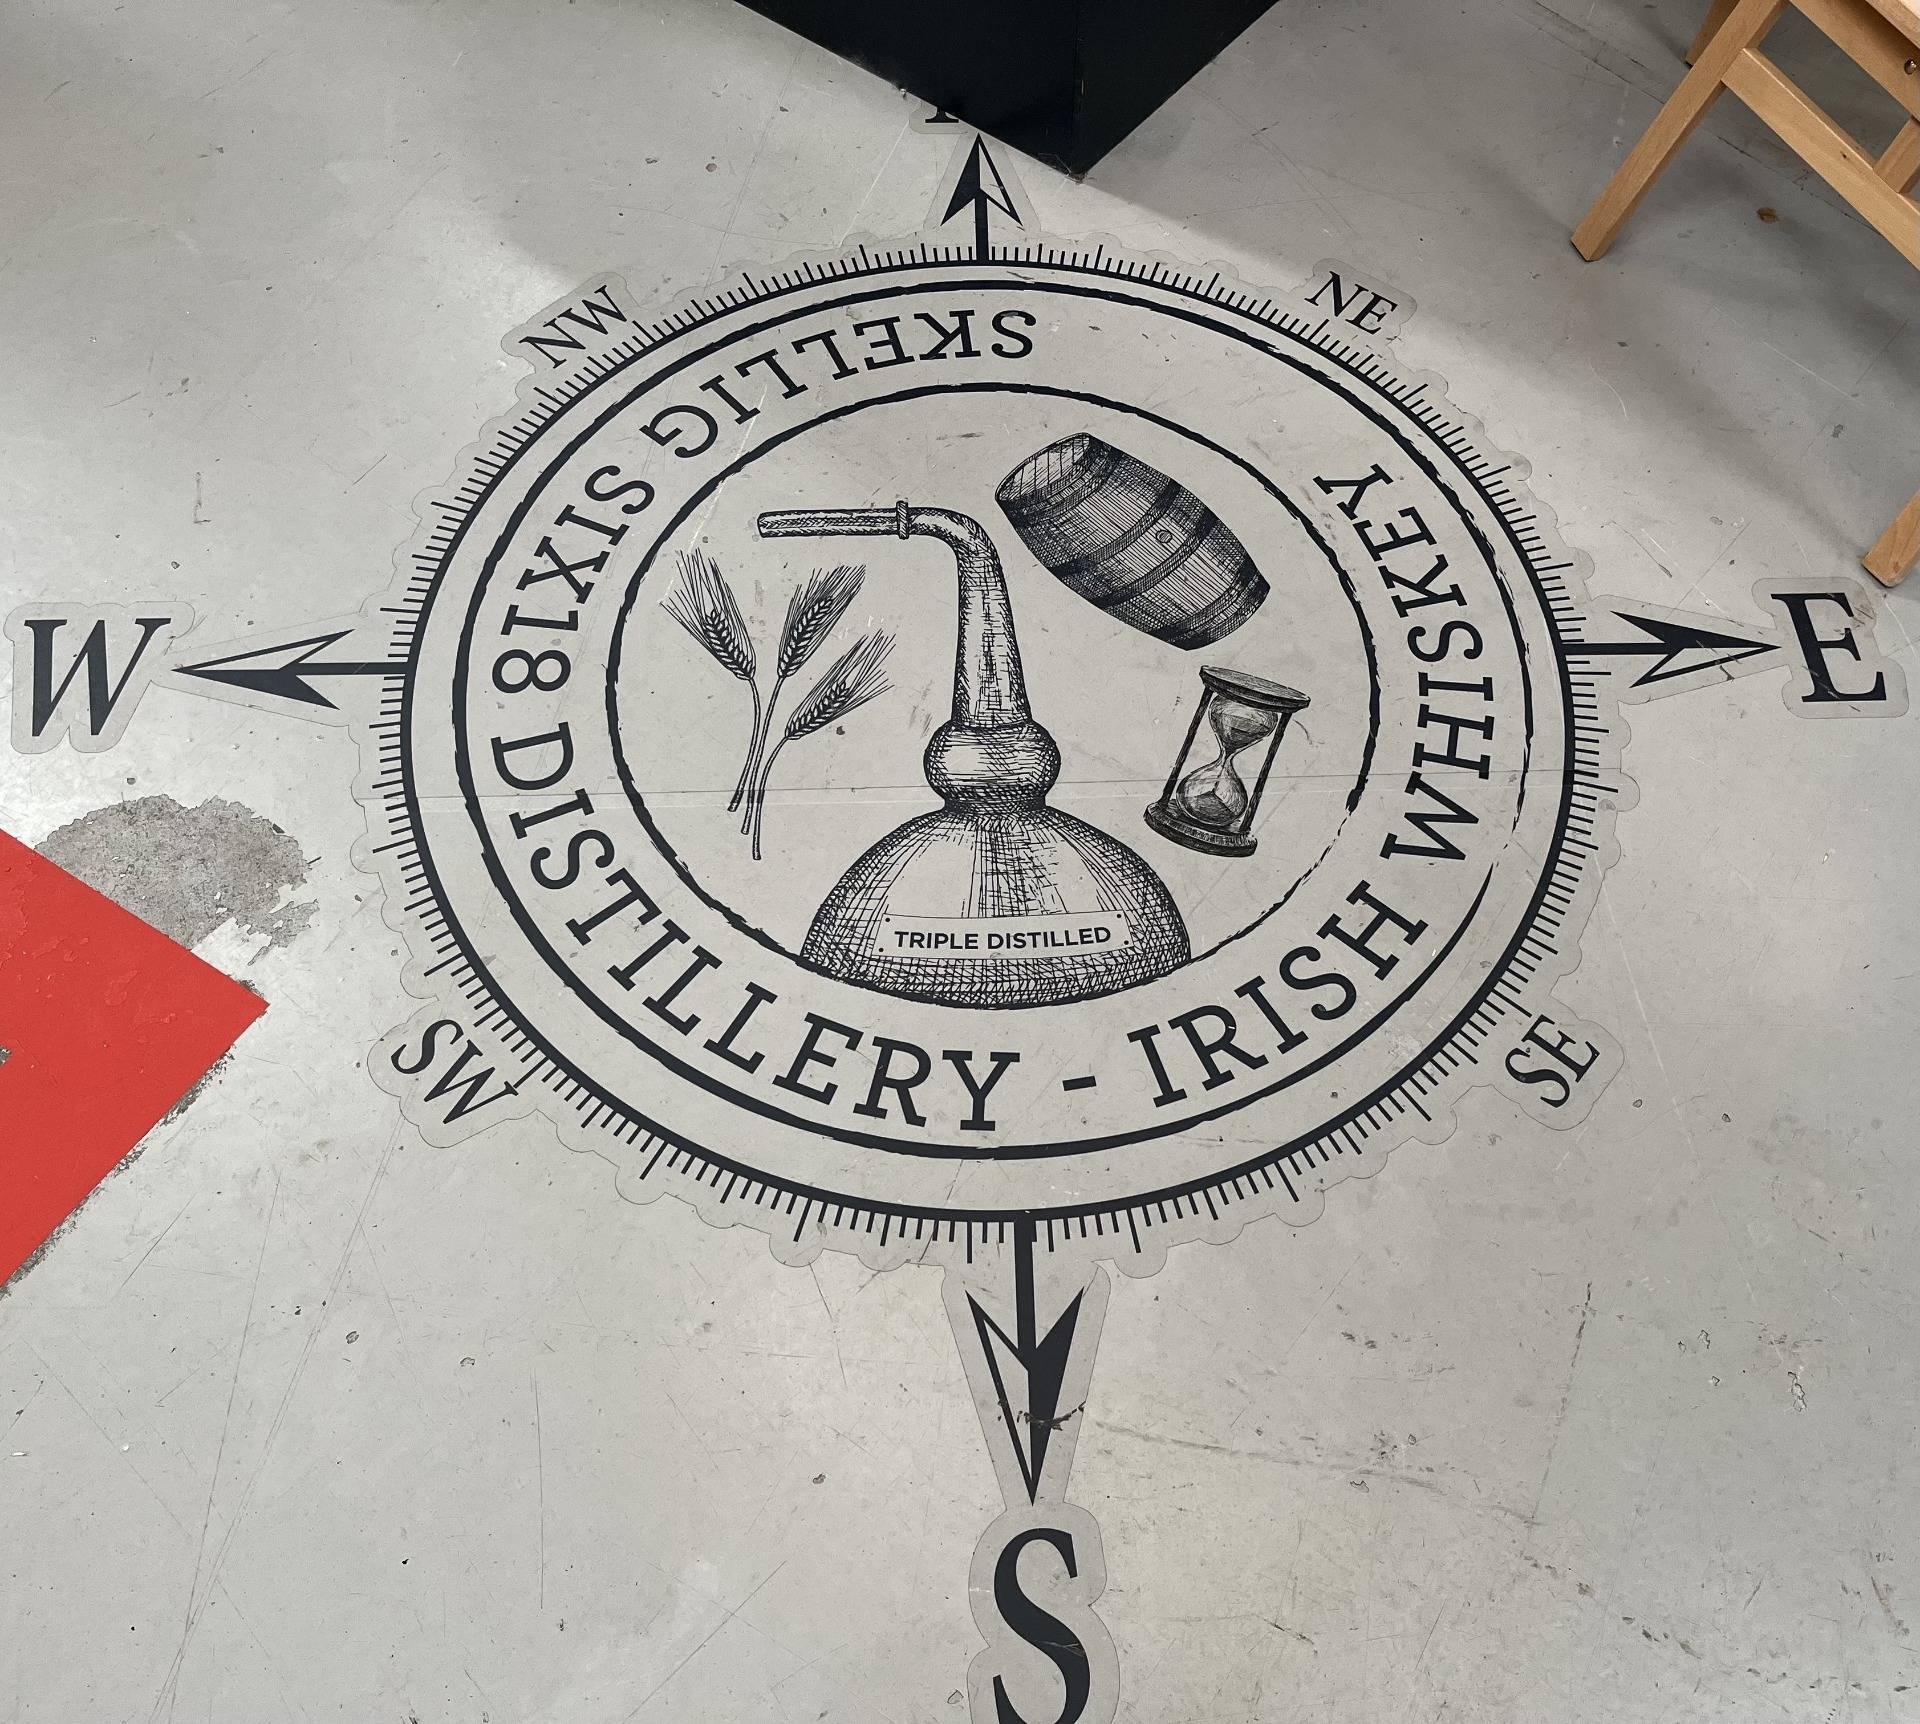 Discovering the Skellig Six 18 distillery: a journey through history and taste
